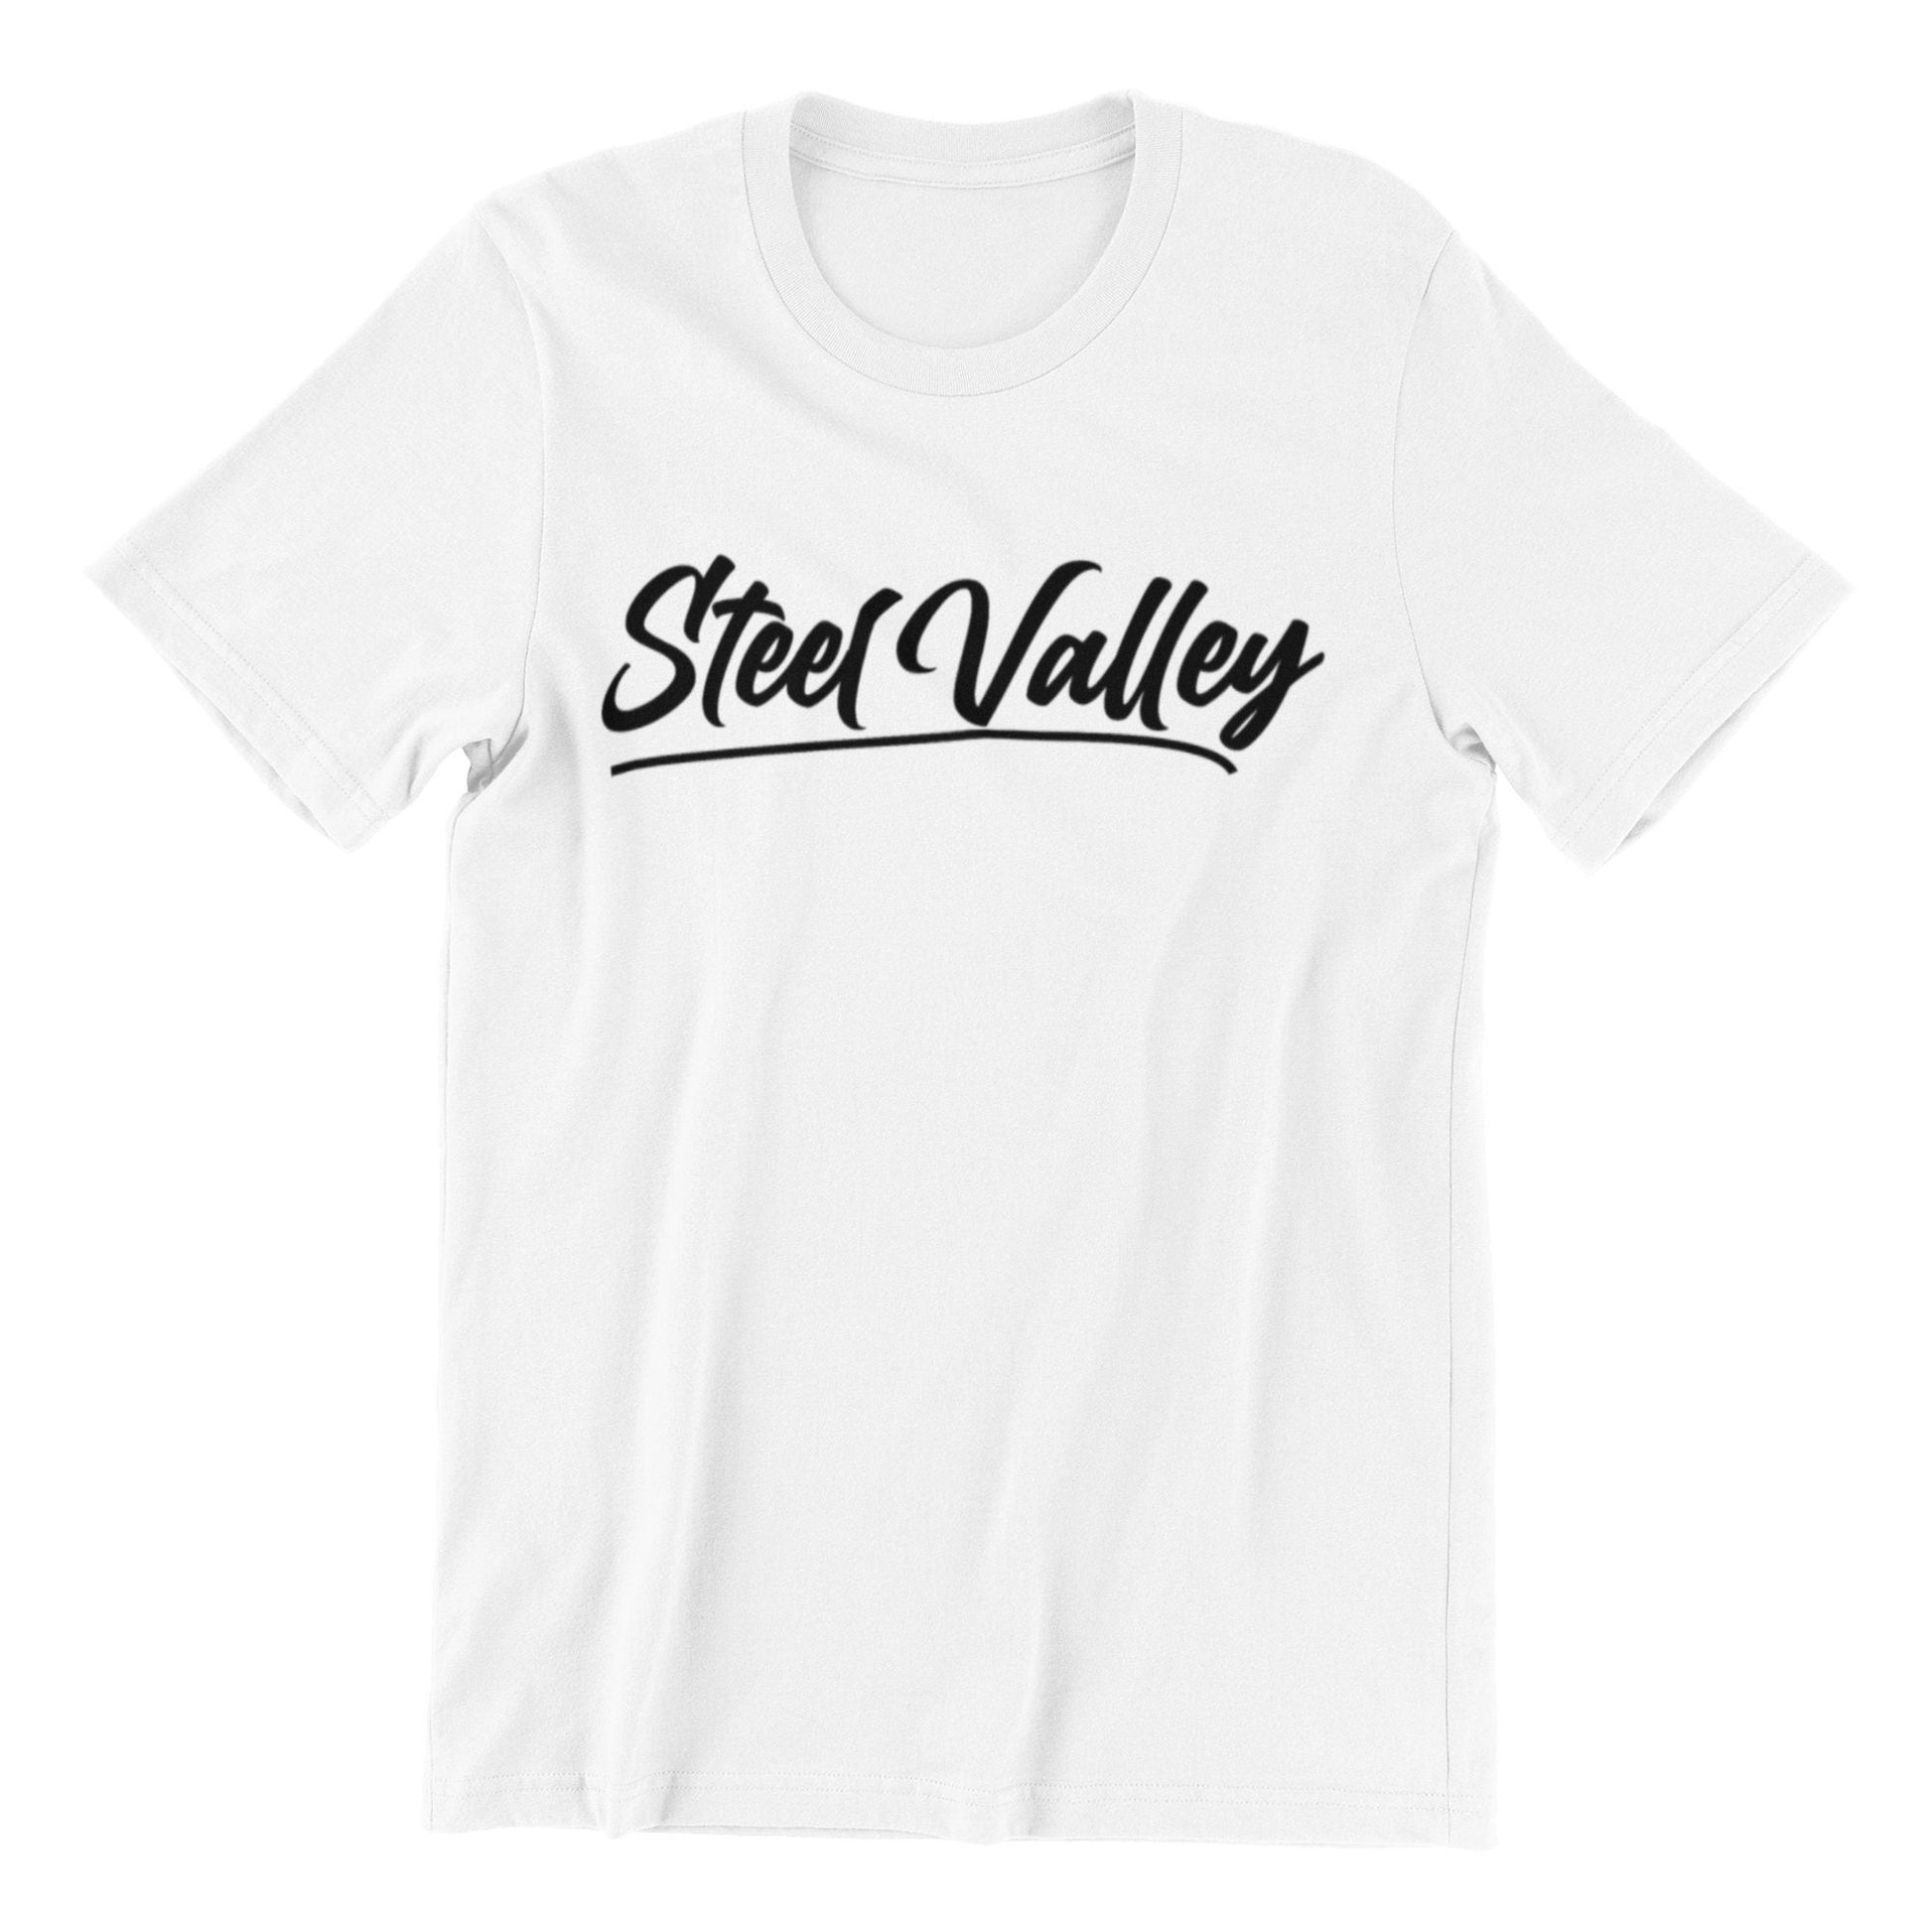 T-Shirt Steel Valley Classic Hometown Pride Custom Shirt & Ink Color, Shirts and Tees, T-Shirt, Tees for Men, Women, and Children